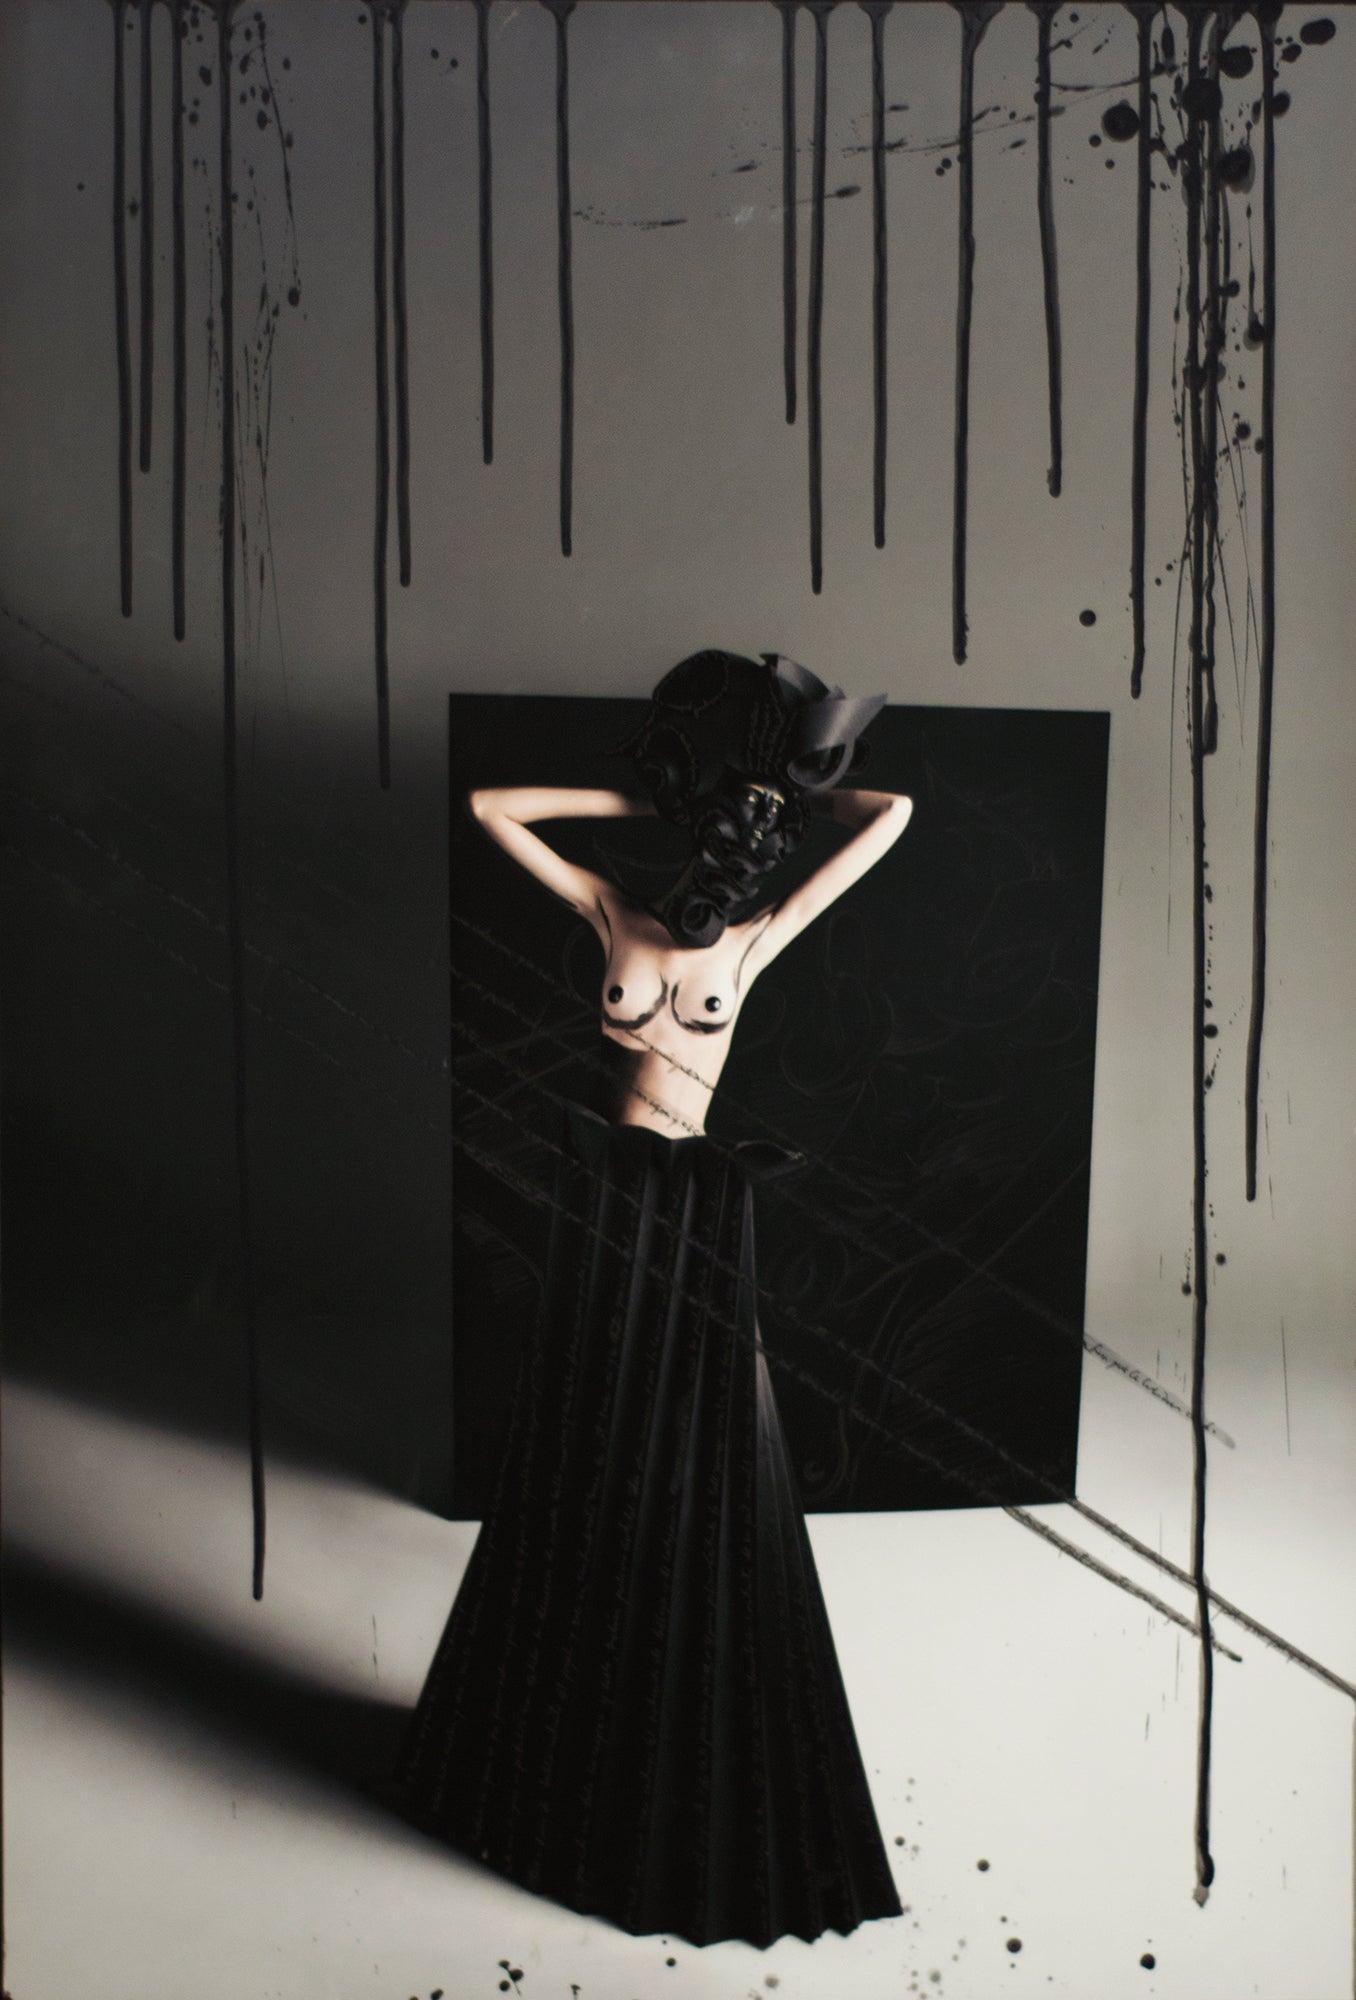 Teresa with Black Origami Skirt. Intervened photograph mounted on aluminum  - Photograph by Efren Isaza